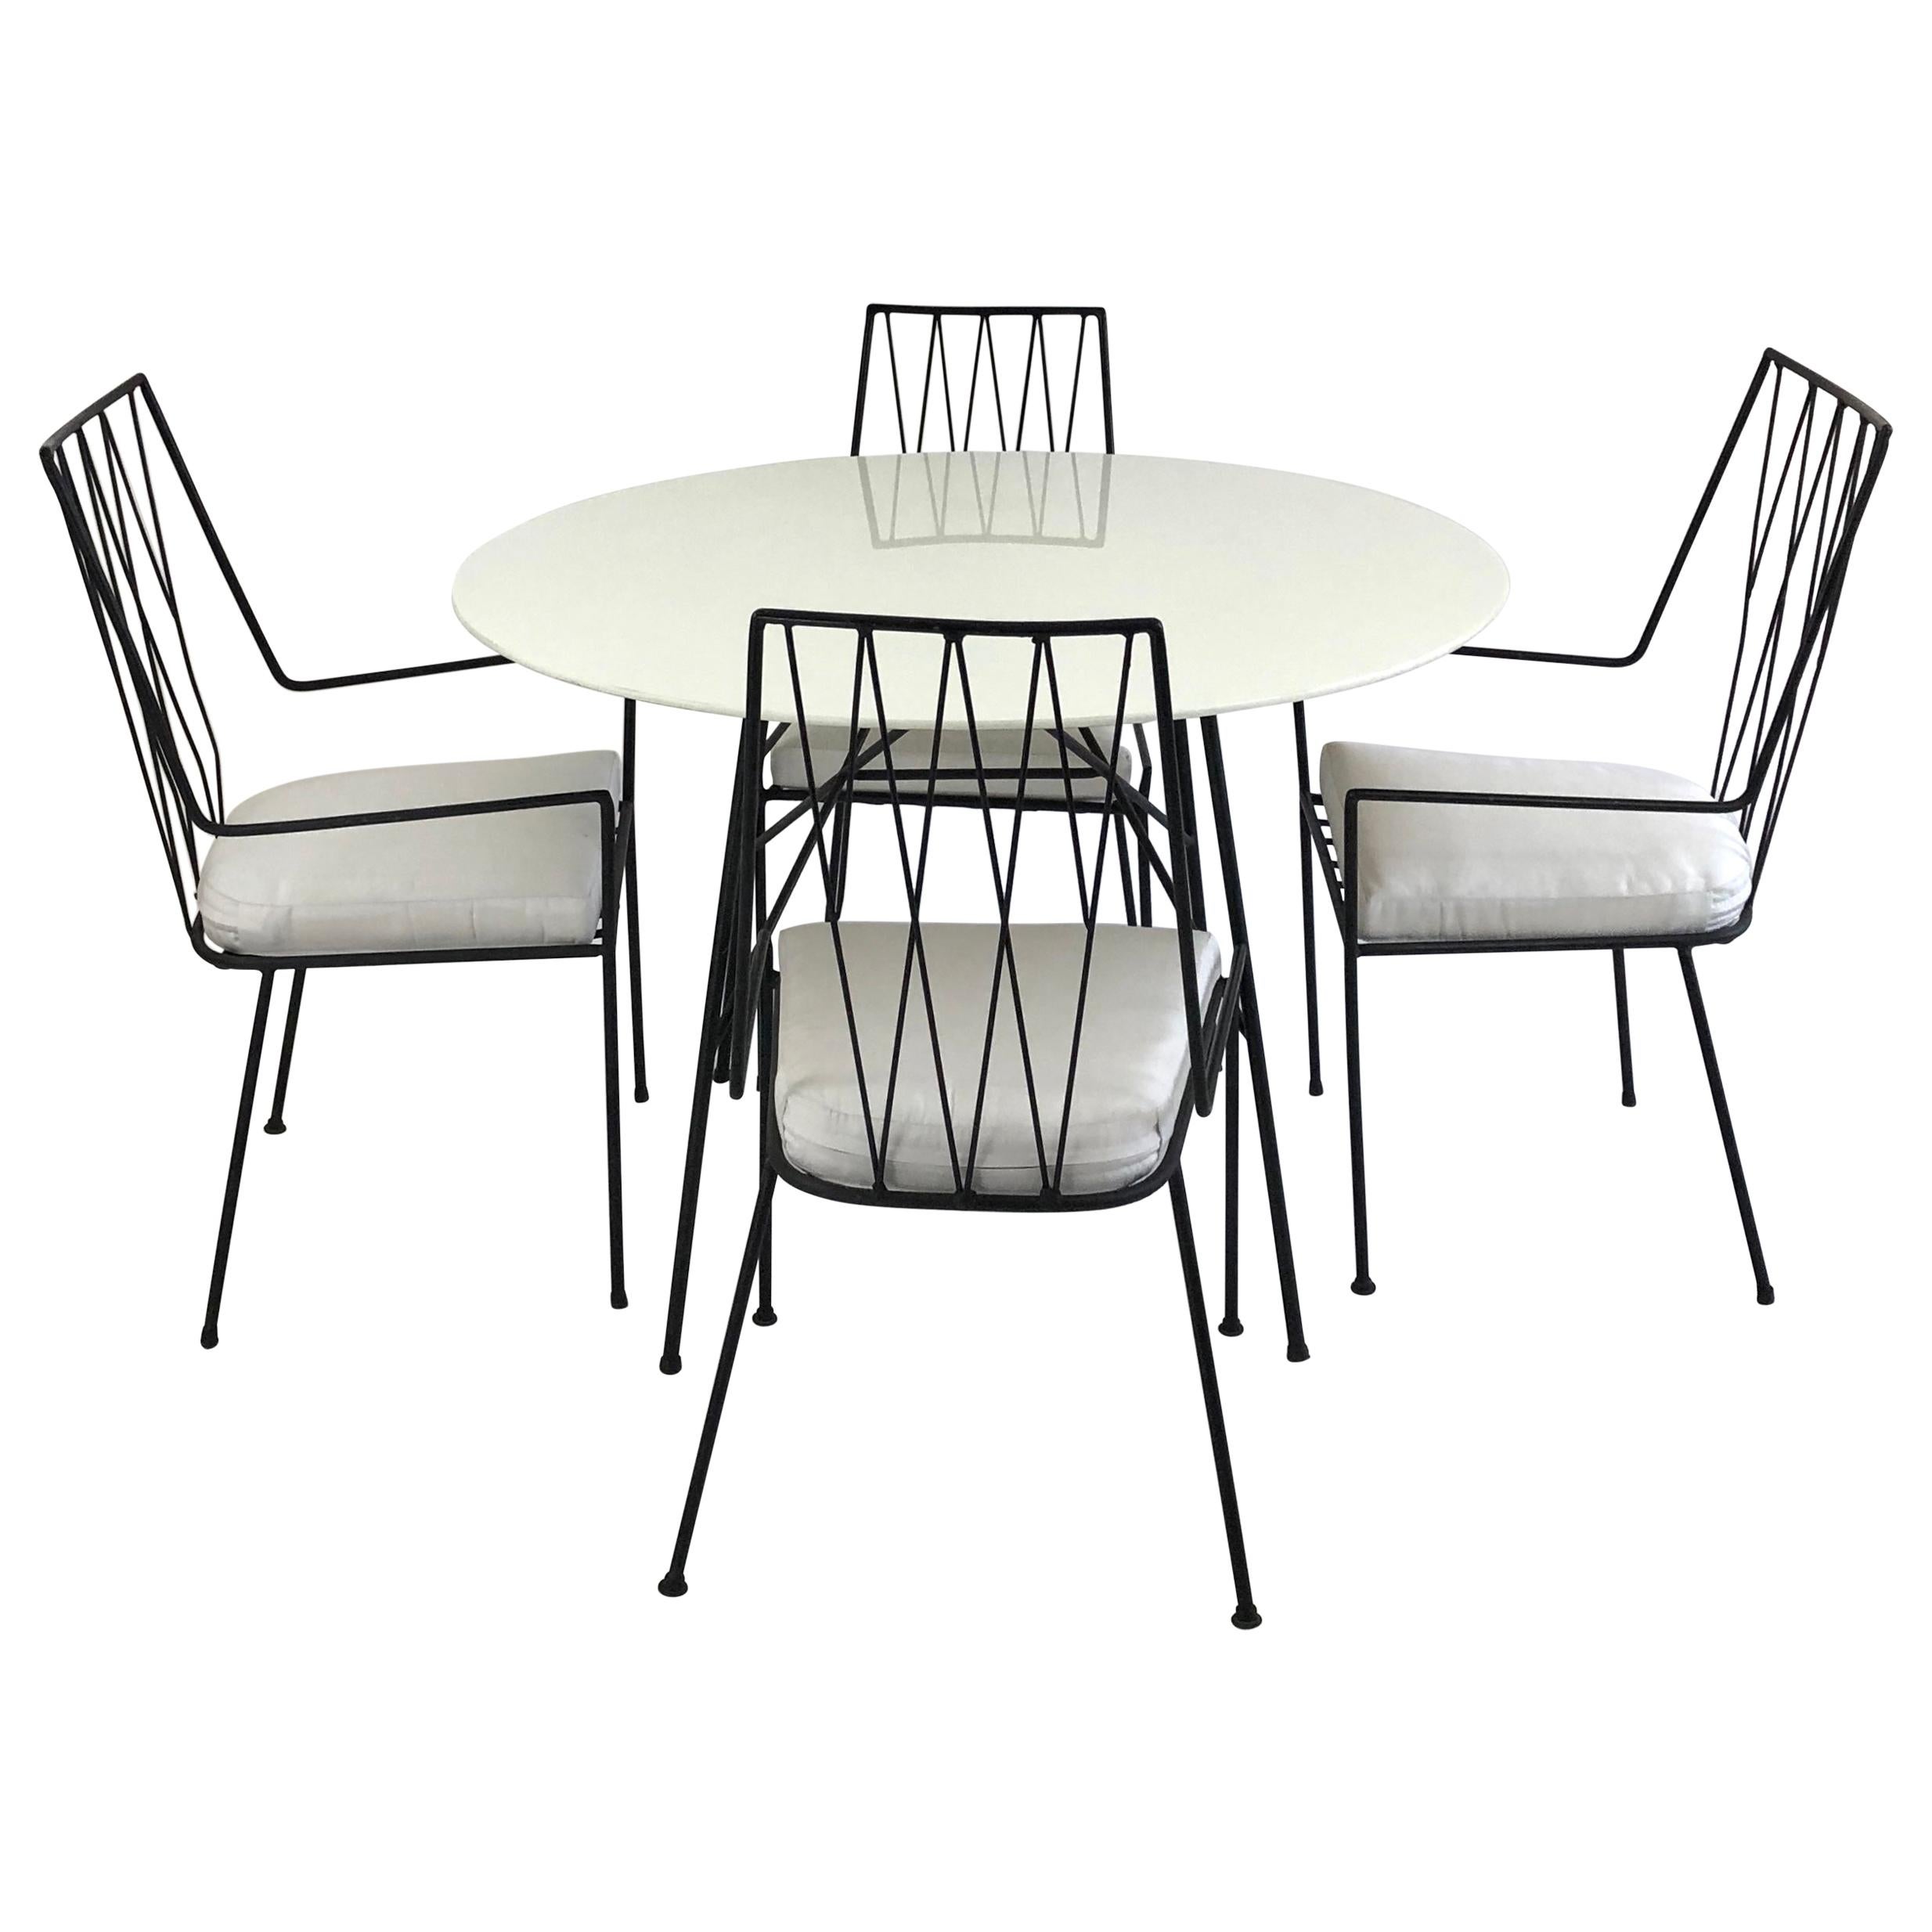 Paul McCobb Pavilion Collection Set of Four Patio Chairs with Table, circa 1950s